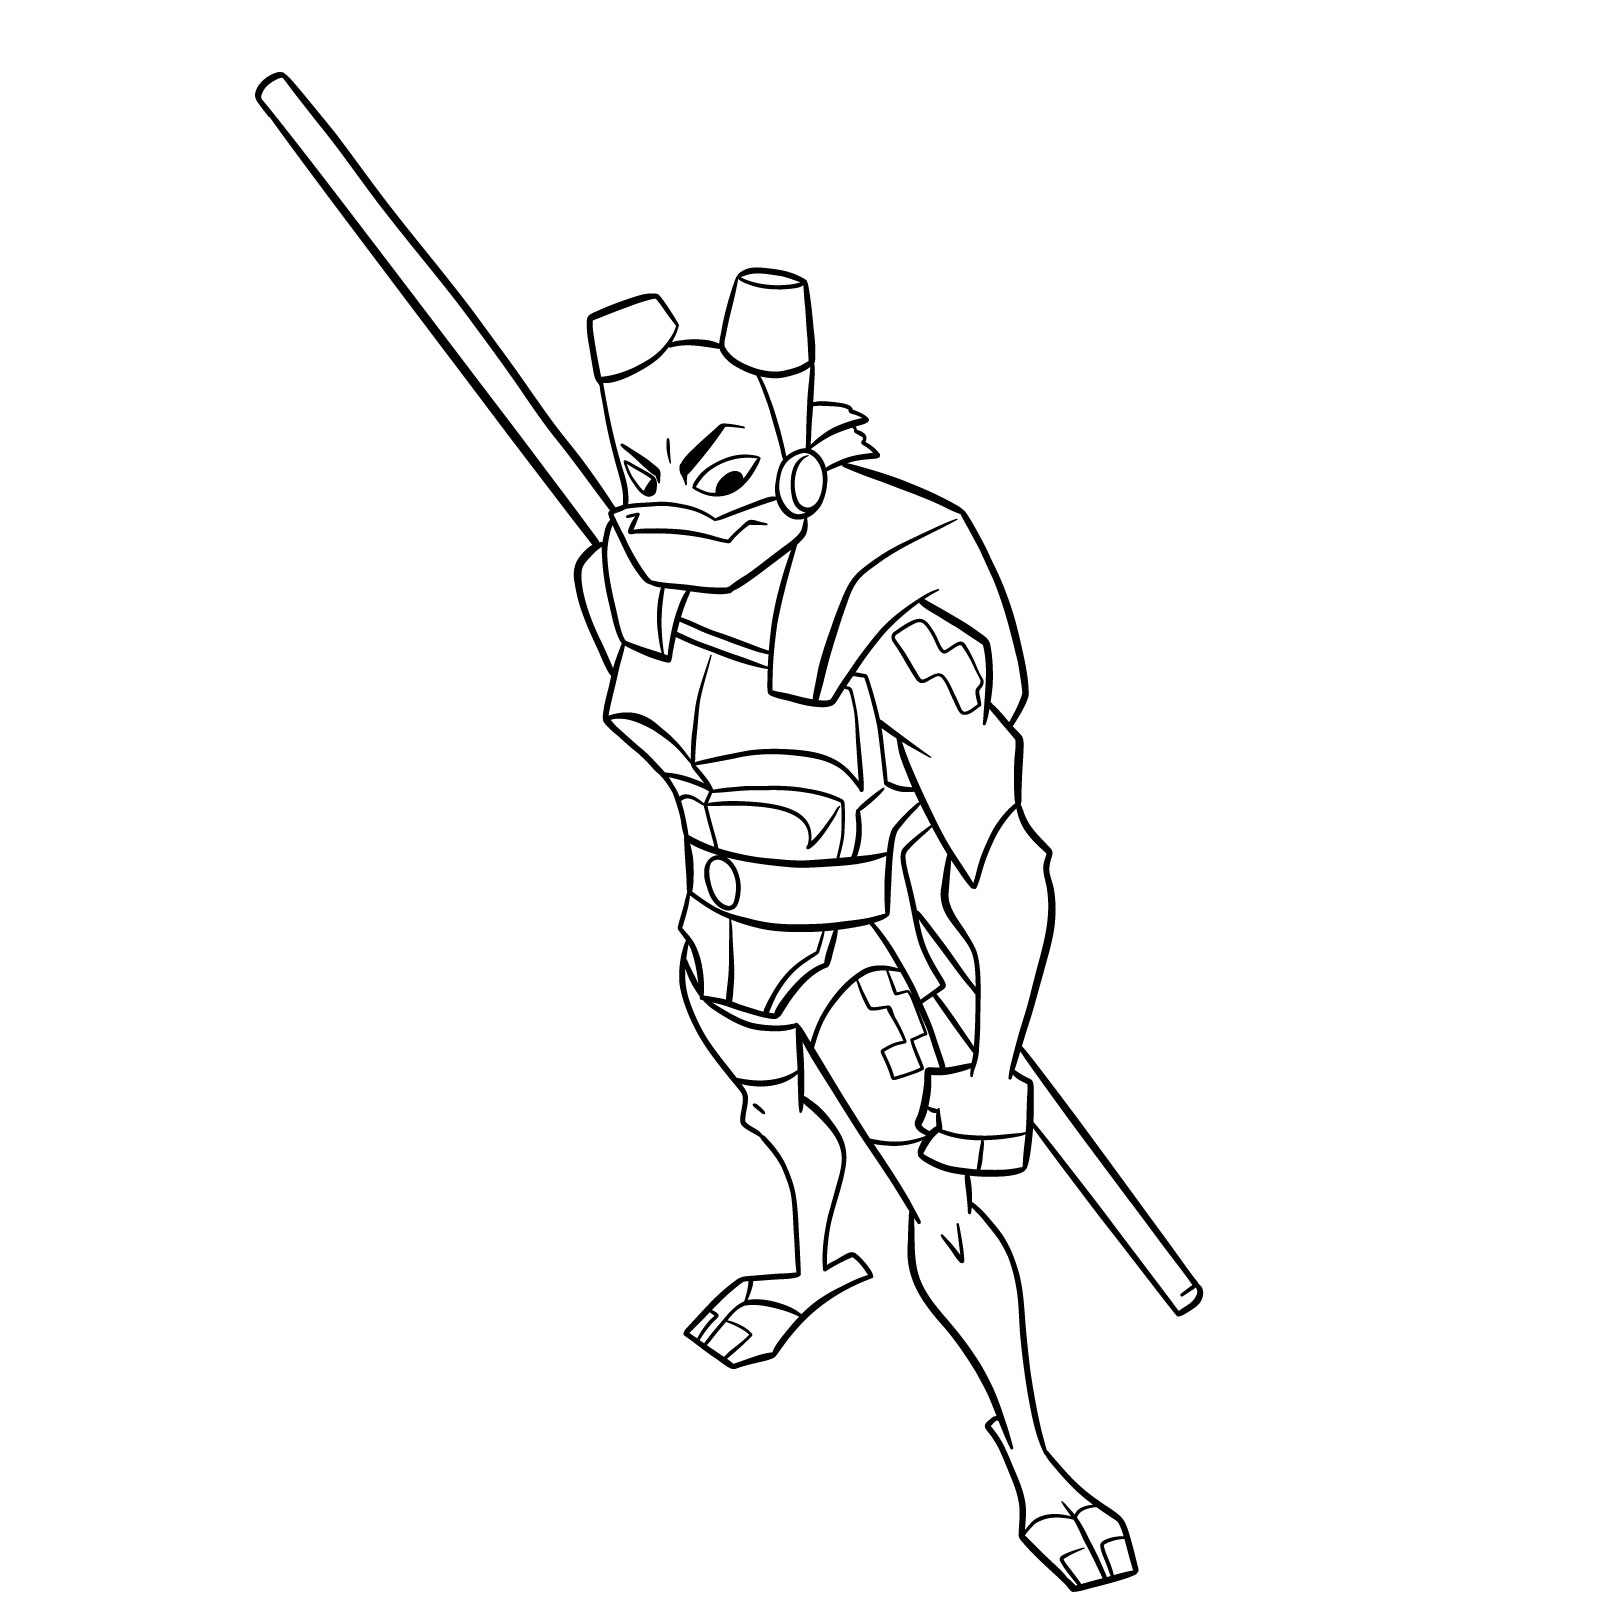 How to draw Donnie in Hamato Ninpō state - final step